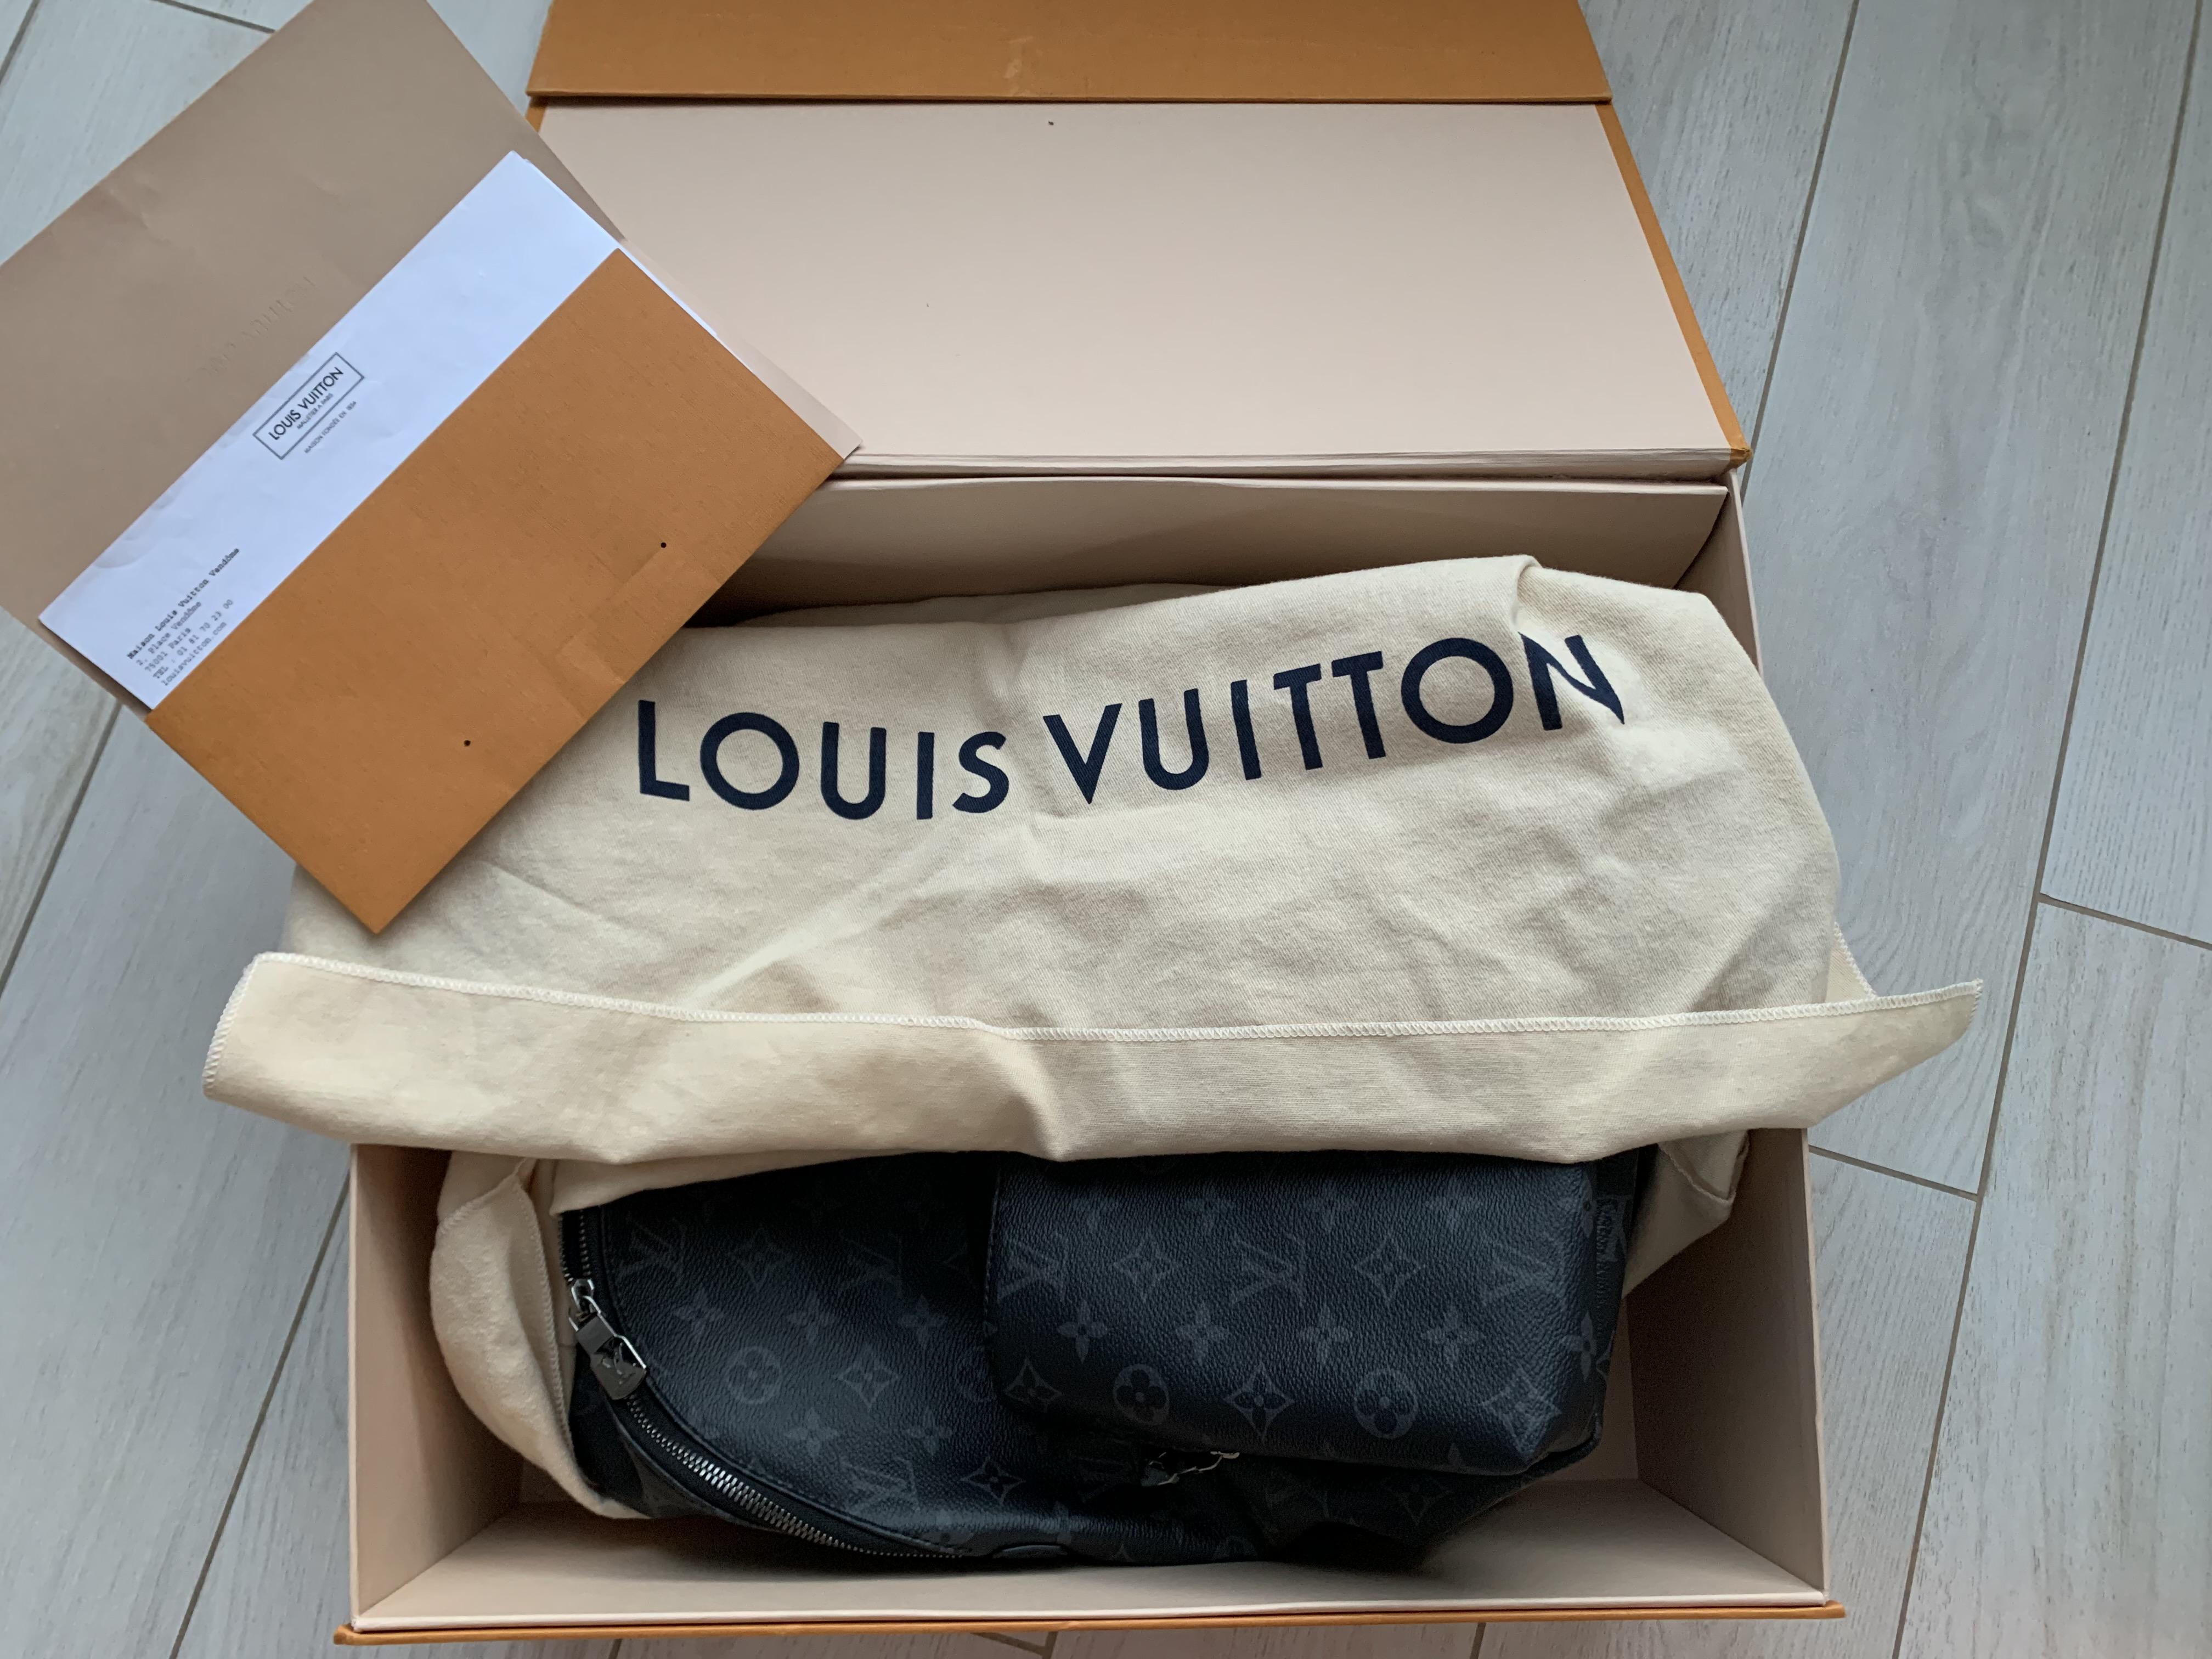 LOUIS VUITTON LAUNCHES NEW LINE OF LUXURY BACKPACKS – APPARATUS